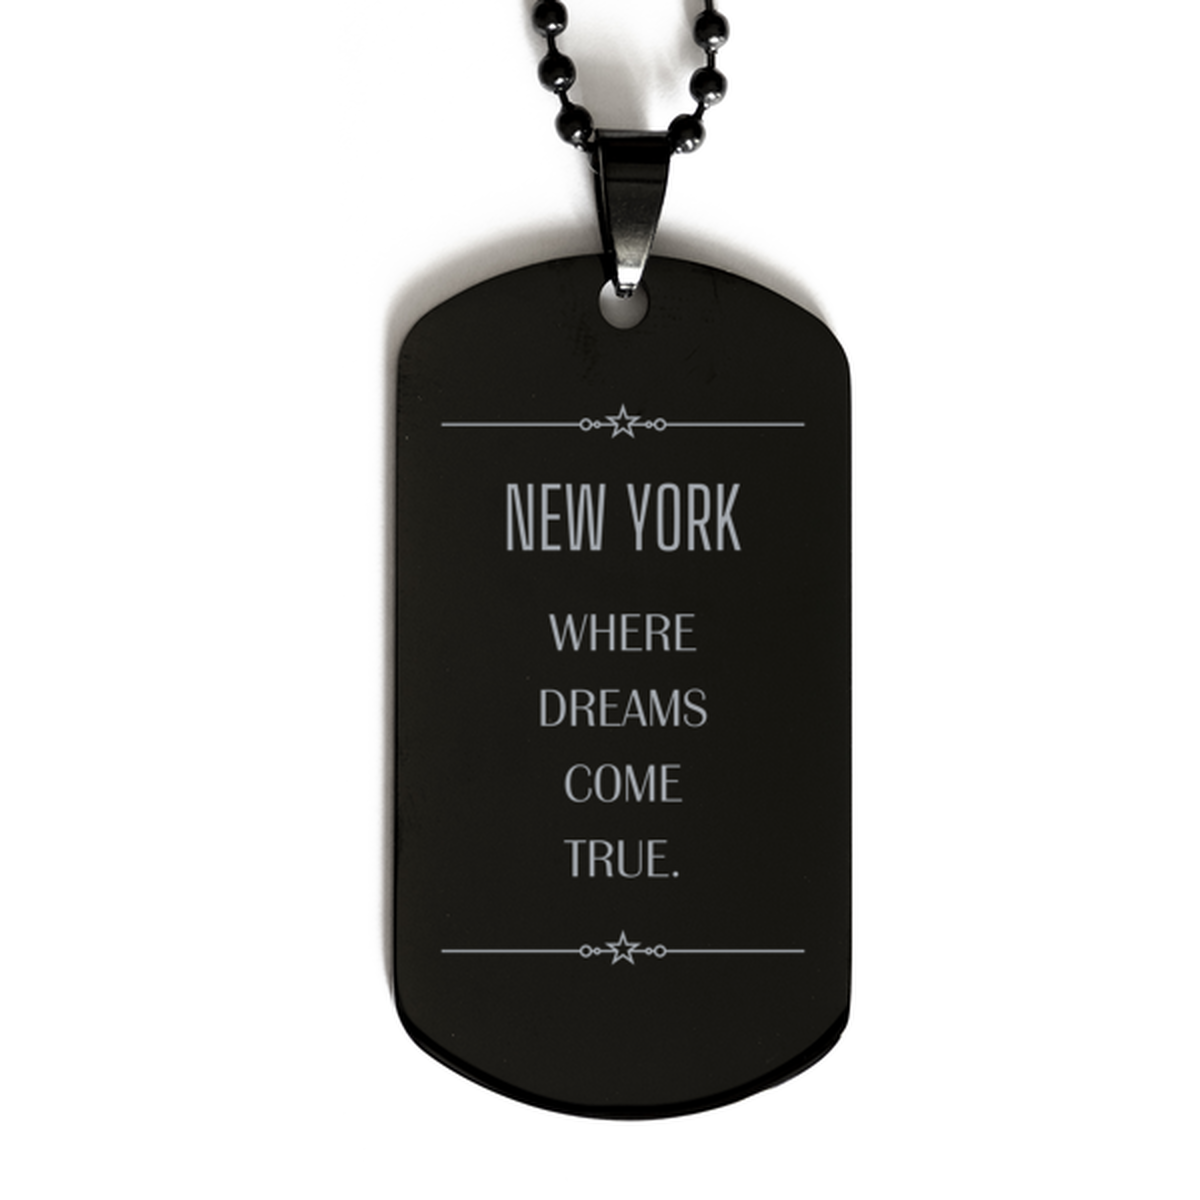 Love New York State Black Dog Tag, New York Where dreams come true, Birthday Inspirational Gifts For New York Men, Women, Friends